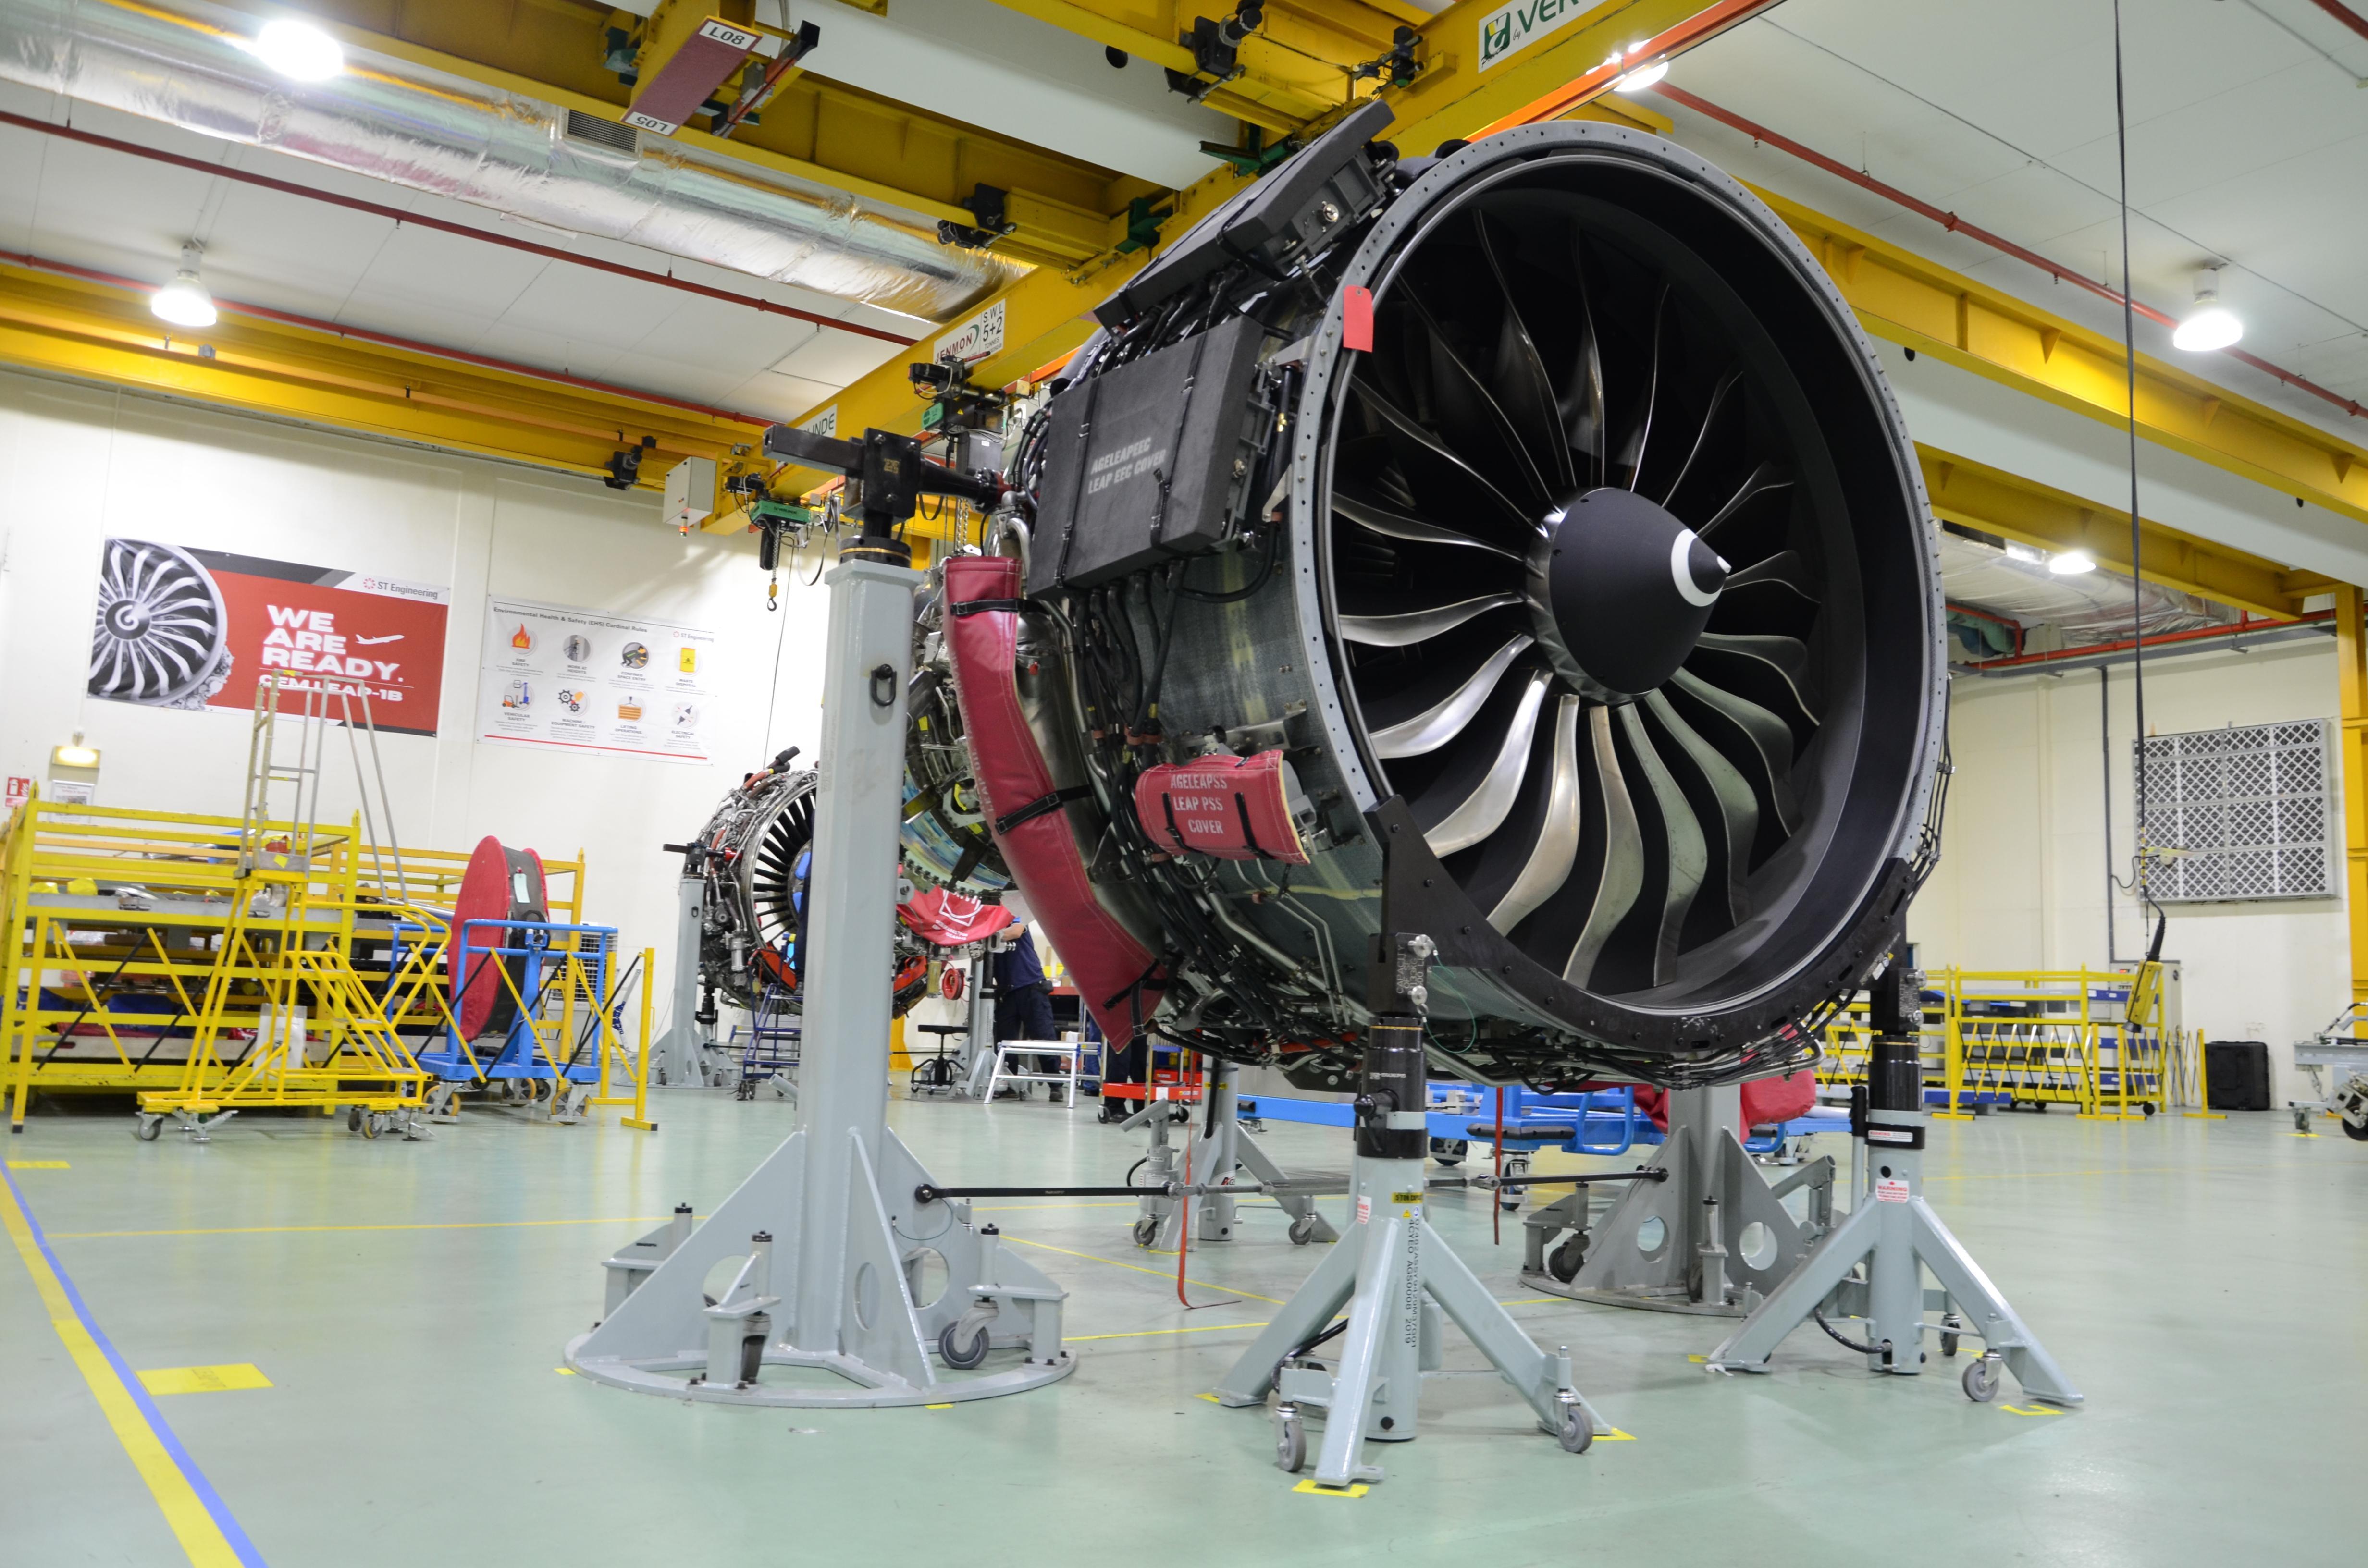 ST Engineering is First MRO Provider in Asia to Offer Full Range of LEAP-1A and LEAP-1B Services